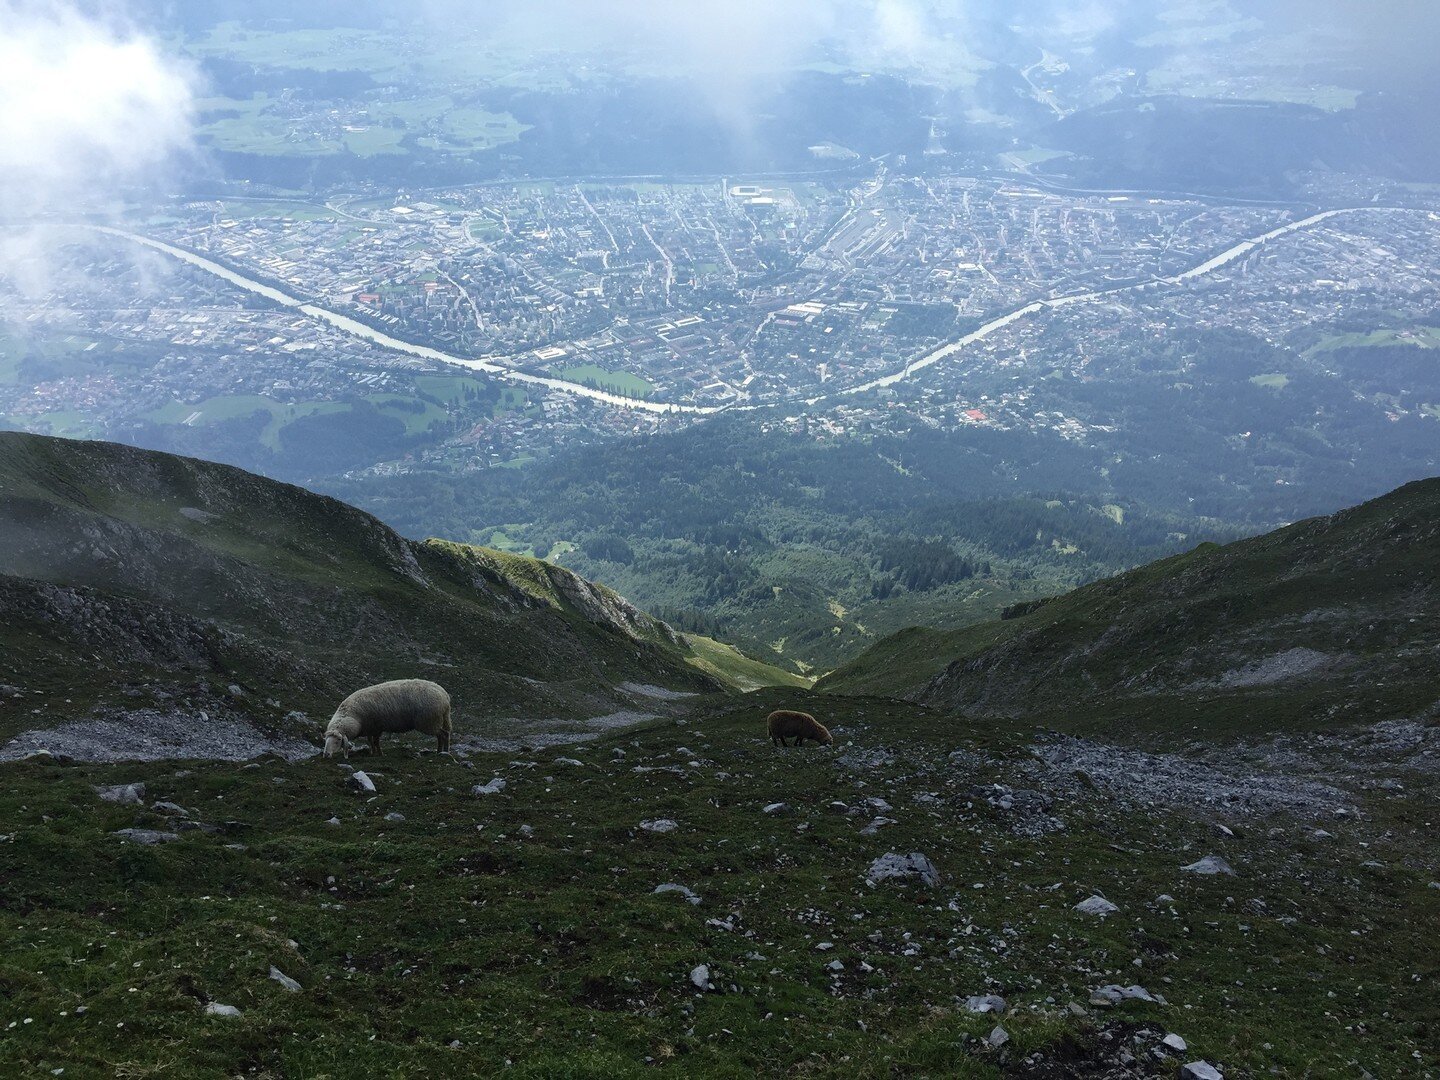 More design inspiration... At Scheefers Architecture, we  value designs that integrate harmoniously with nature. This photo was taken on a trip to Innsbruck, Austria - hiking above the city on the steep mountainside. We love the balance captured here